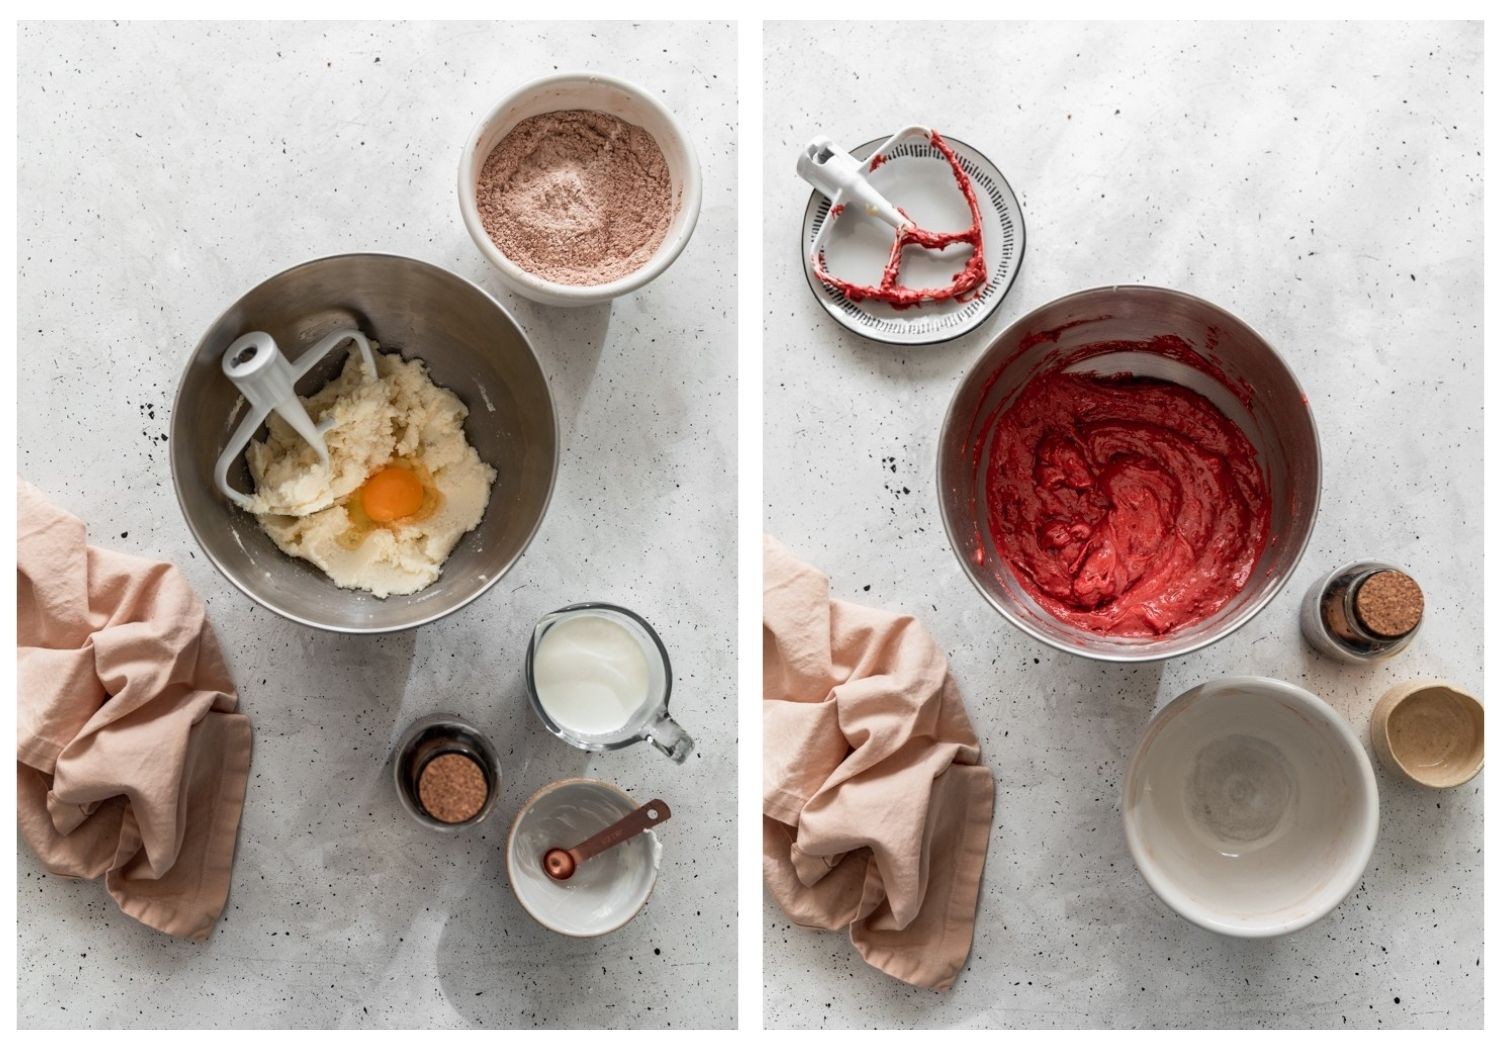 Two overhead images; on the left, butter and an egg in a stand mixer bowl on a grey table surrounded by cake ingredients and a pink linen. On the right, a bowl filled with red cake batter next to empty baking dishes and a pink linen.